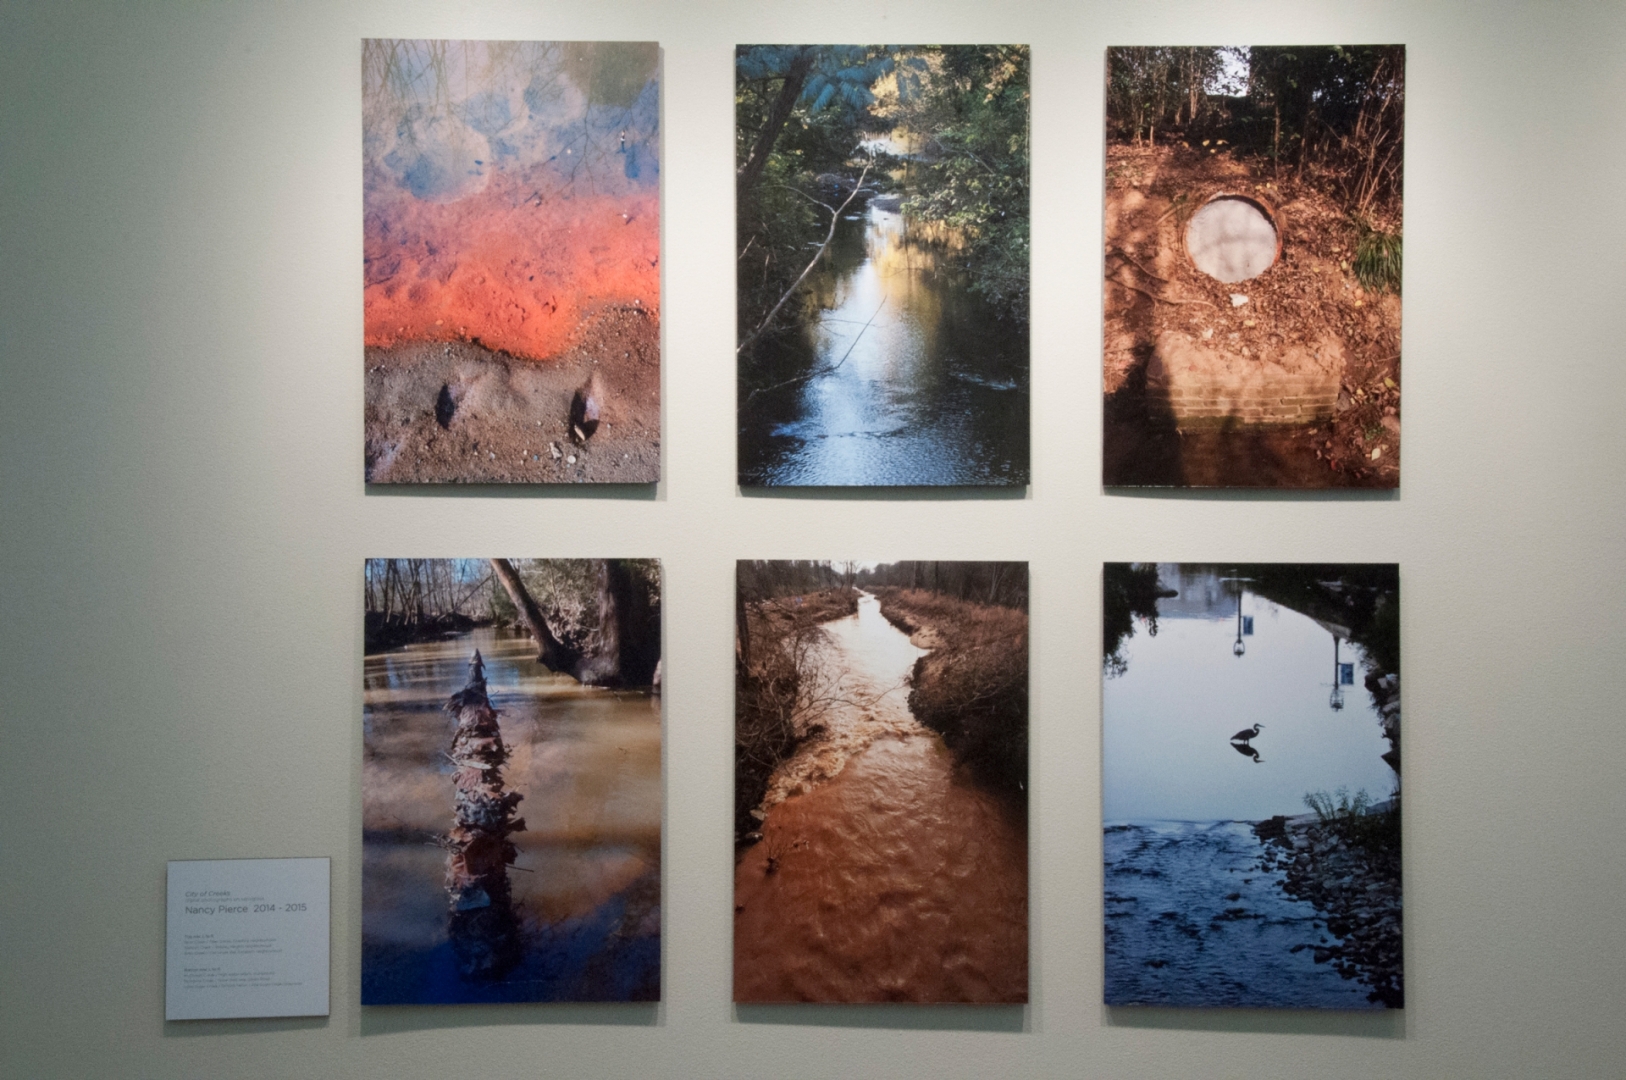 Photos of Mecklenburg creeks by Nancy Pierce at Projective Eye Gallery. Photo: College of Arts + Architecture